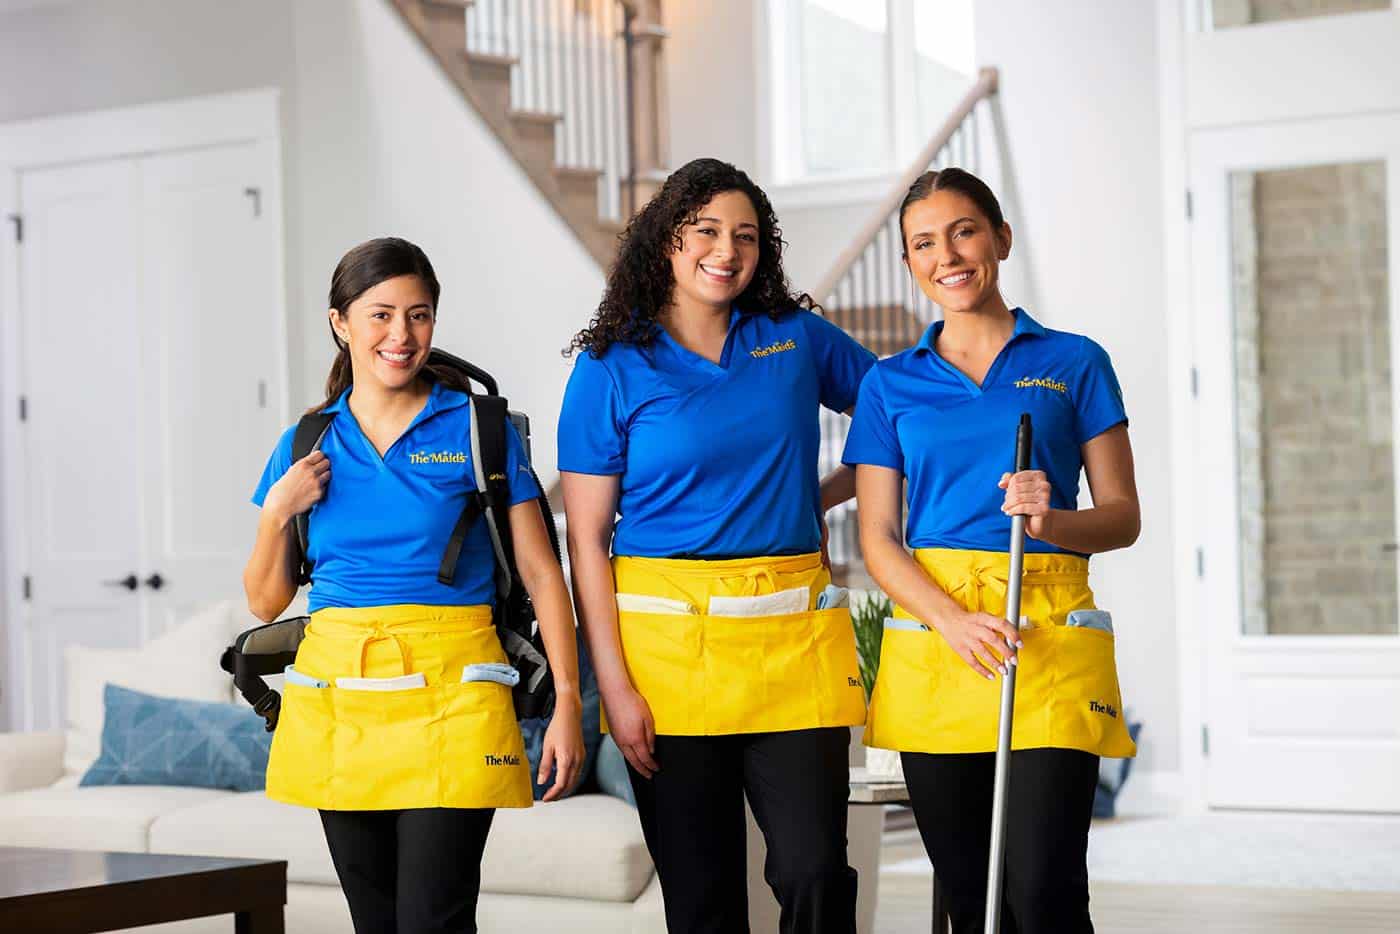 House Cleaning Services in Austin, TX, Maid Services